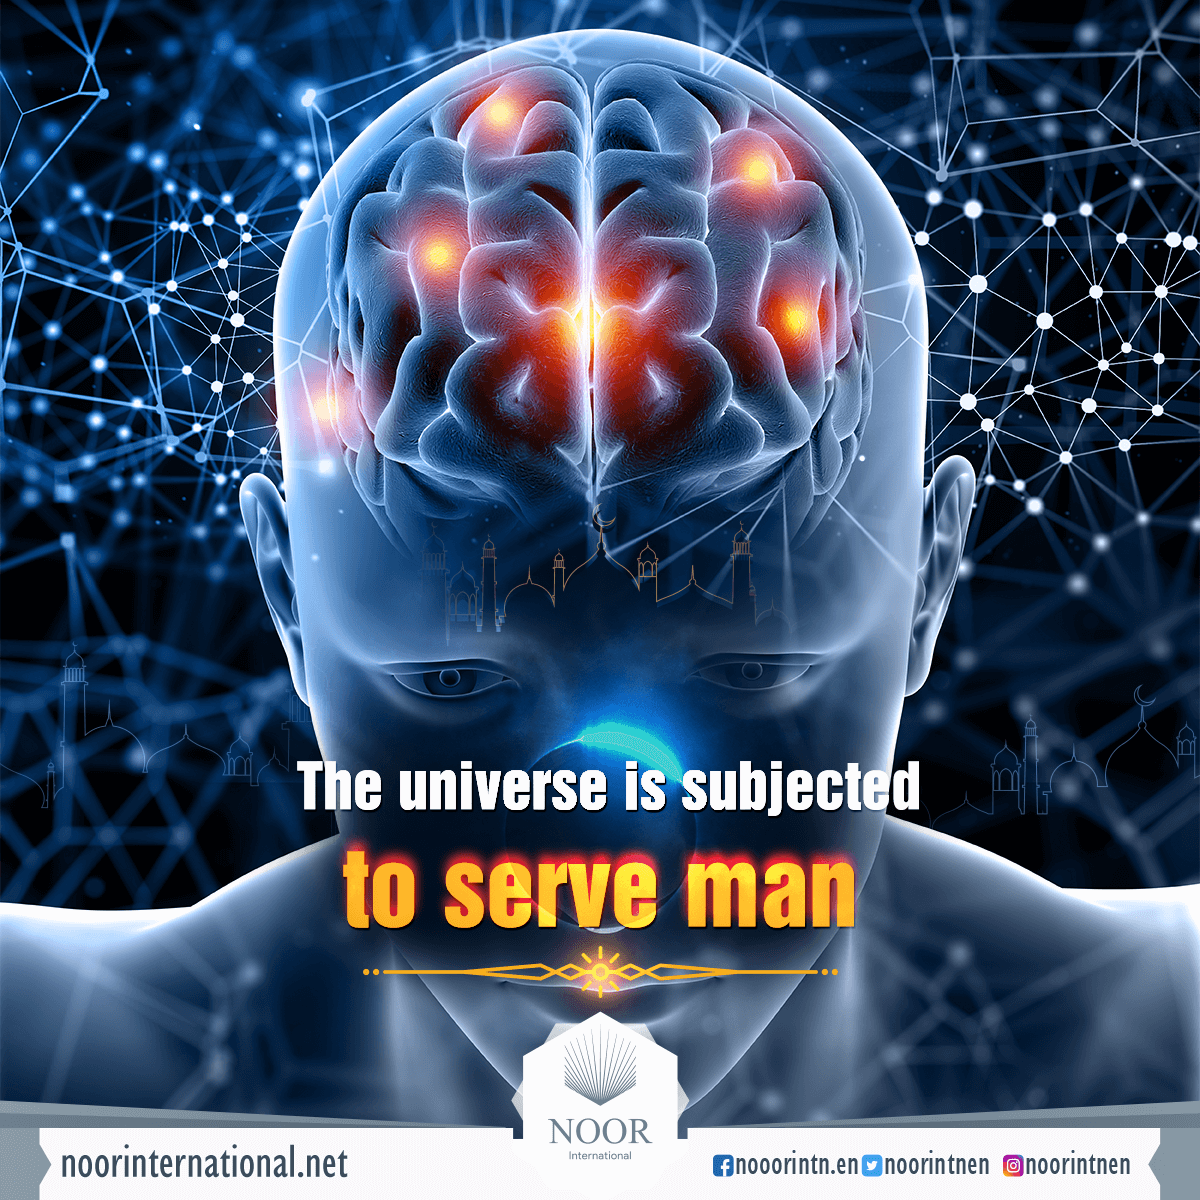 The universe is subjected to serve man